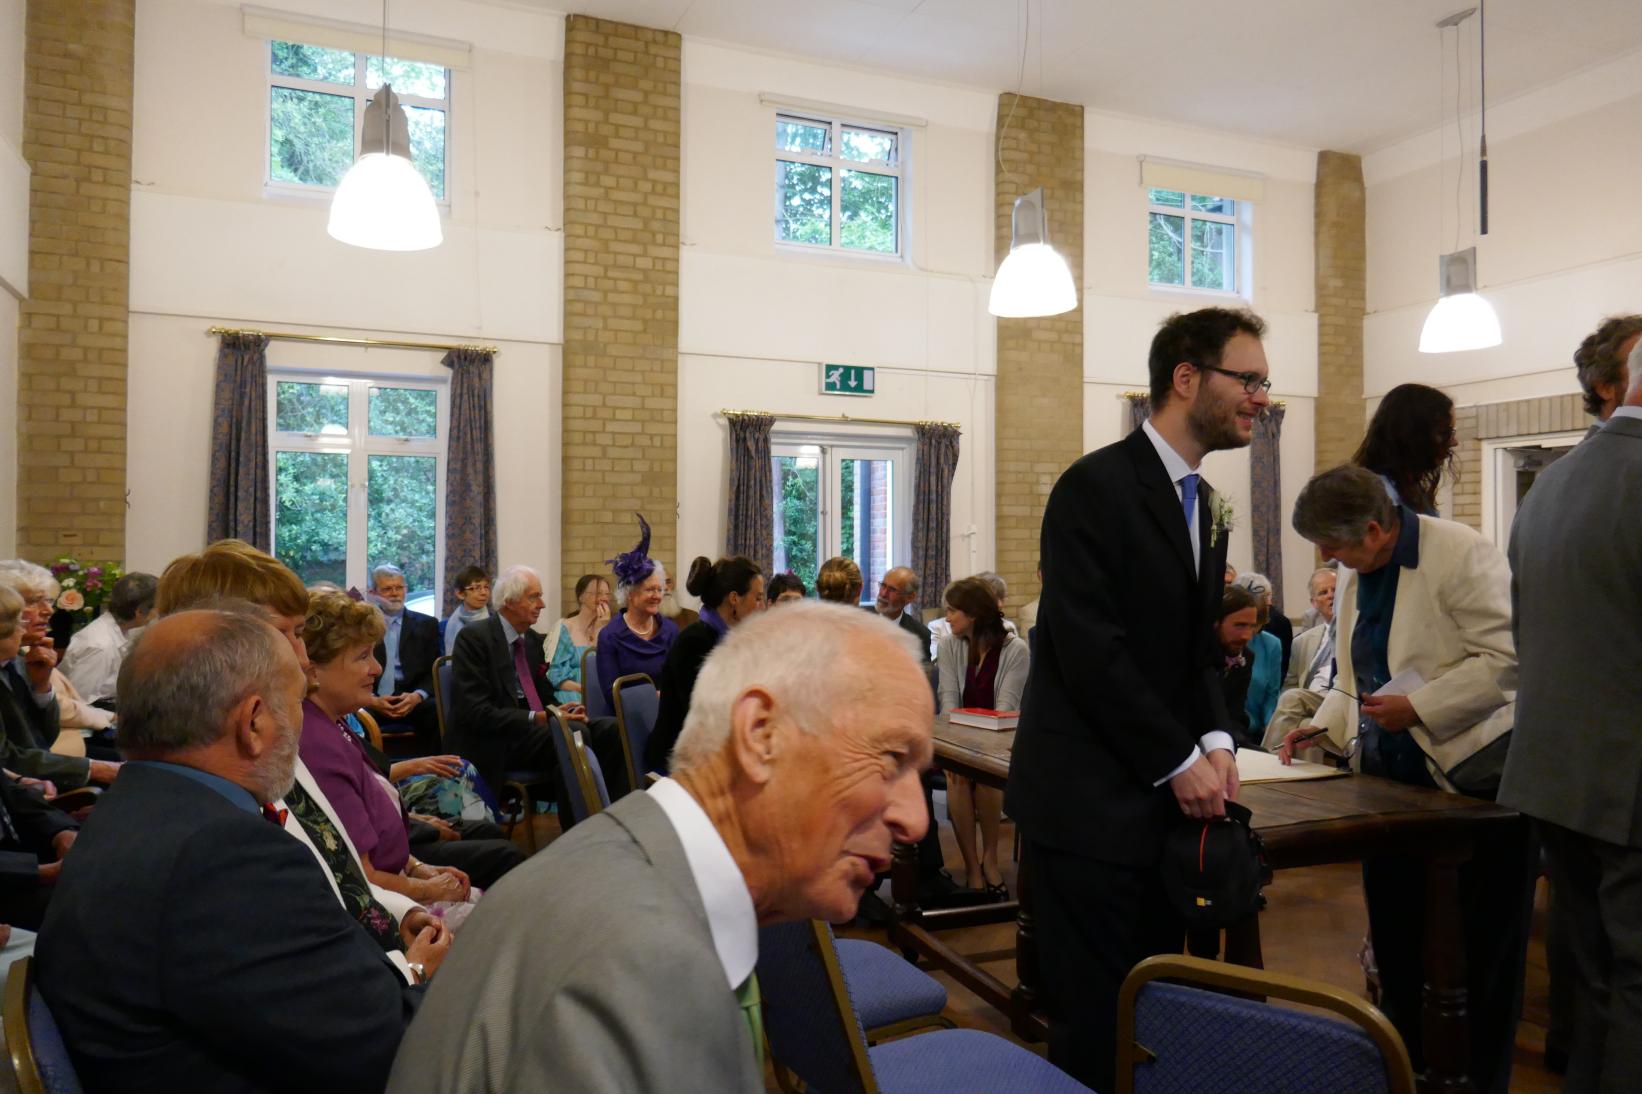 [Monday 5th June, After the Marriage inside the Watford Quaker Meeting House (Photo by Paul).